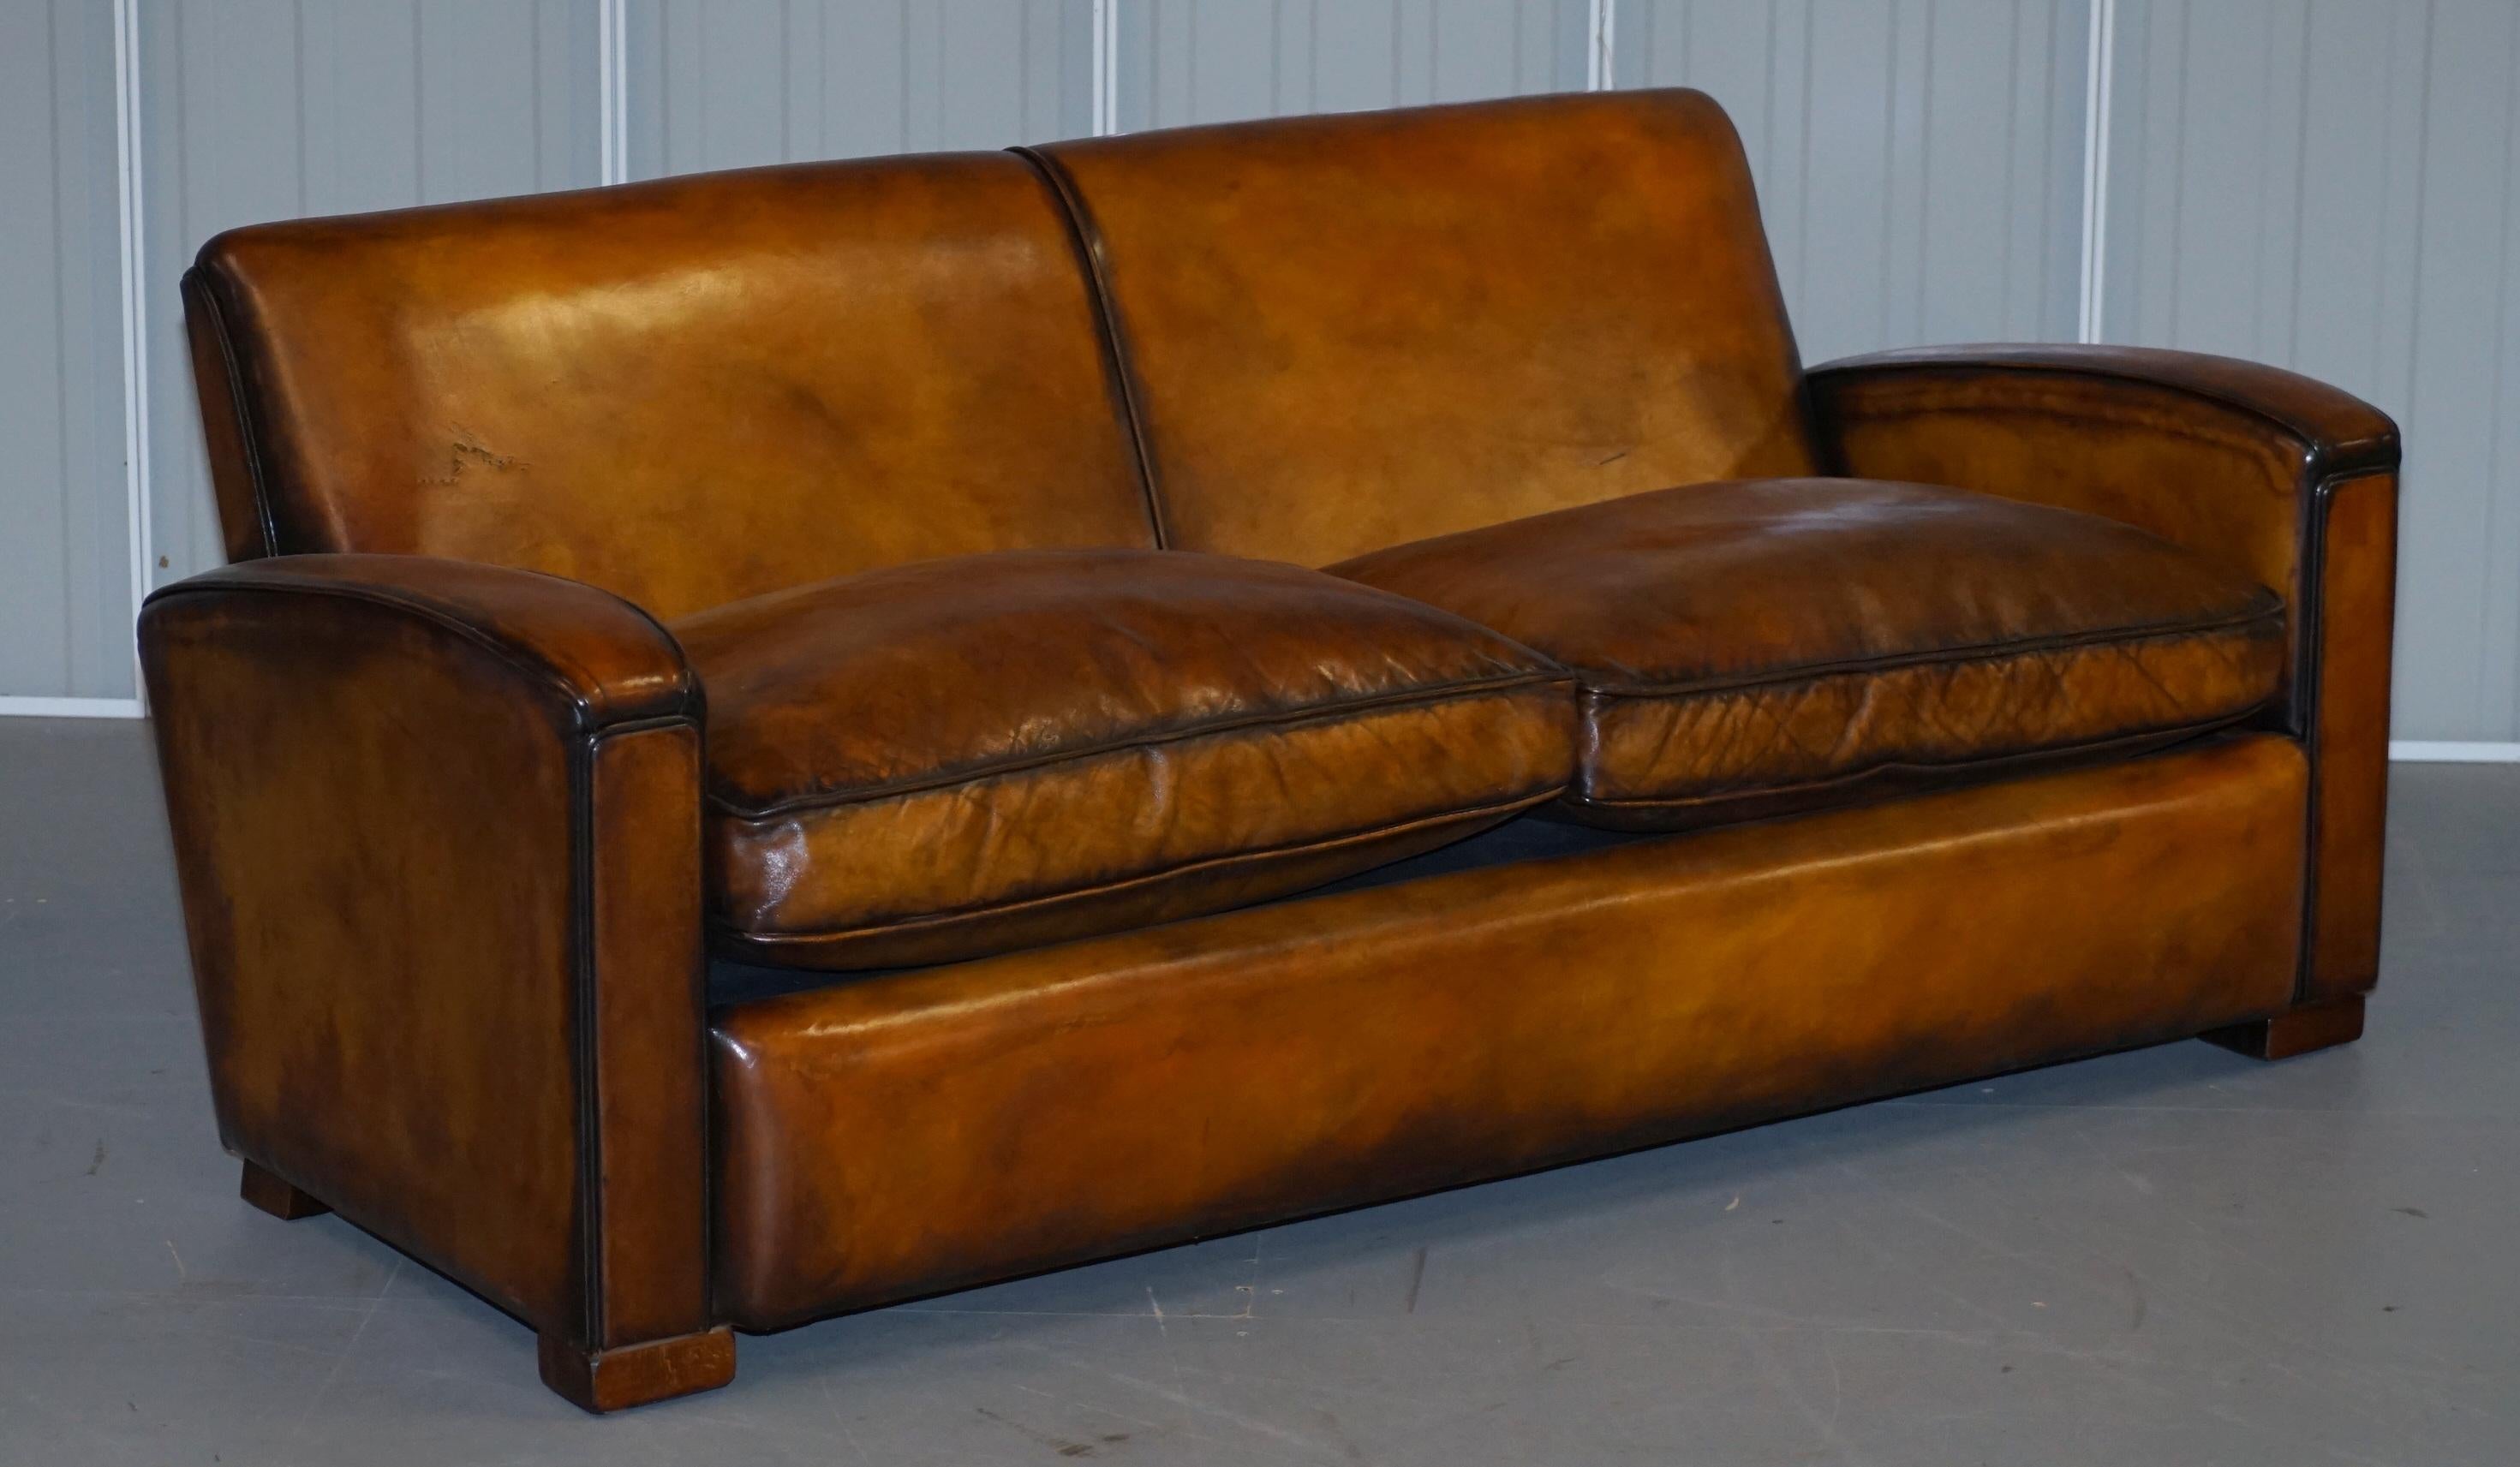 We are delighted to offer for sale this stunning original Art Deco fully restored hand dyed whisky brown leather sofa and armchairs suite

A stunning set that has been restored to a very high standard indeed. The suite has been upholstered with